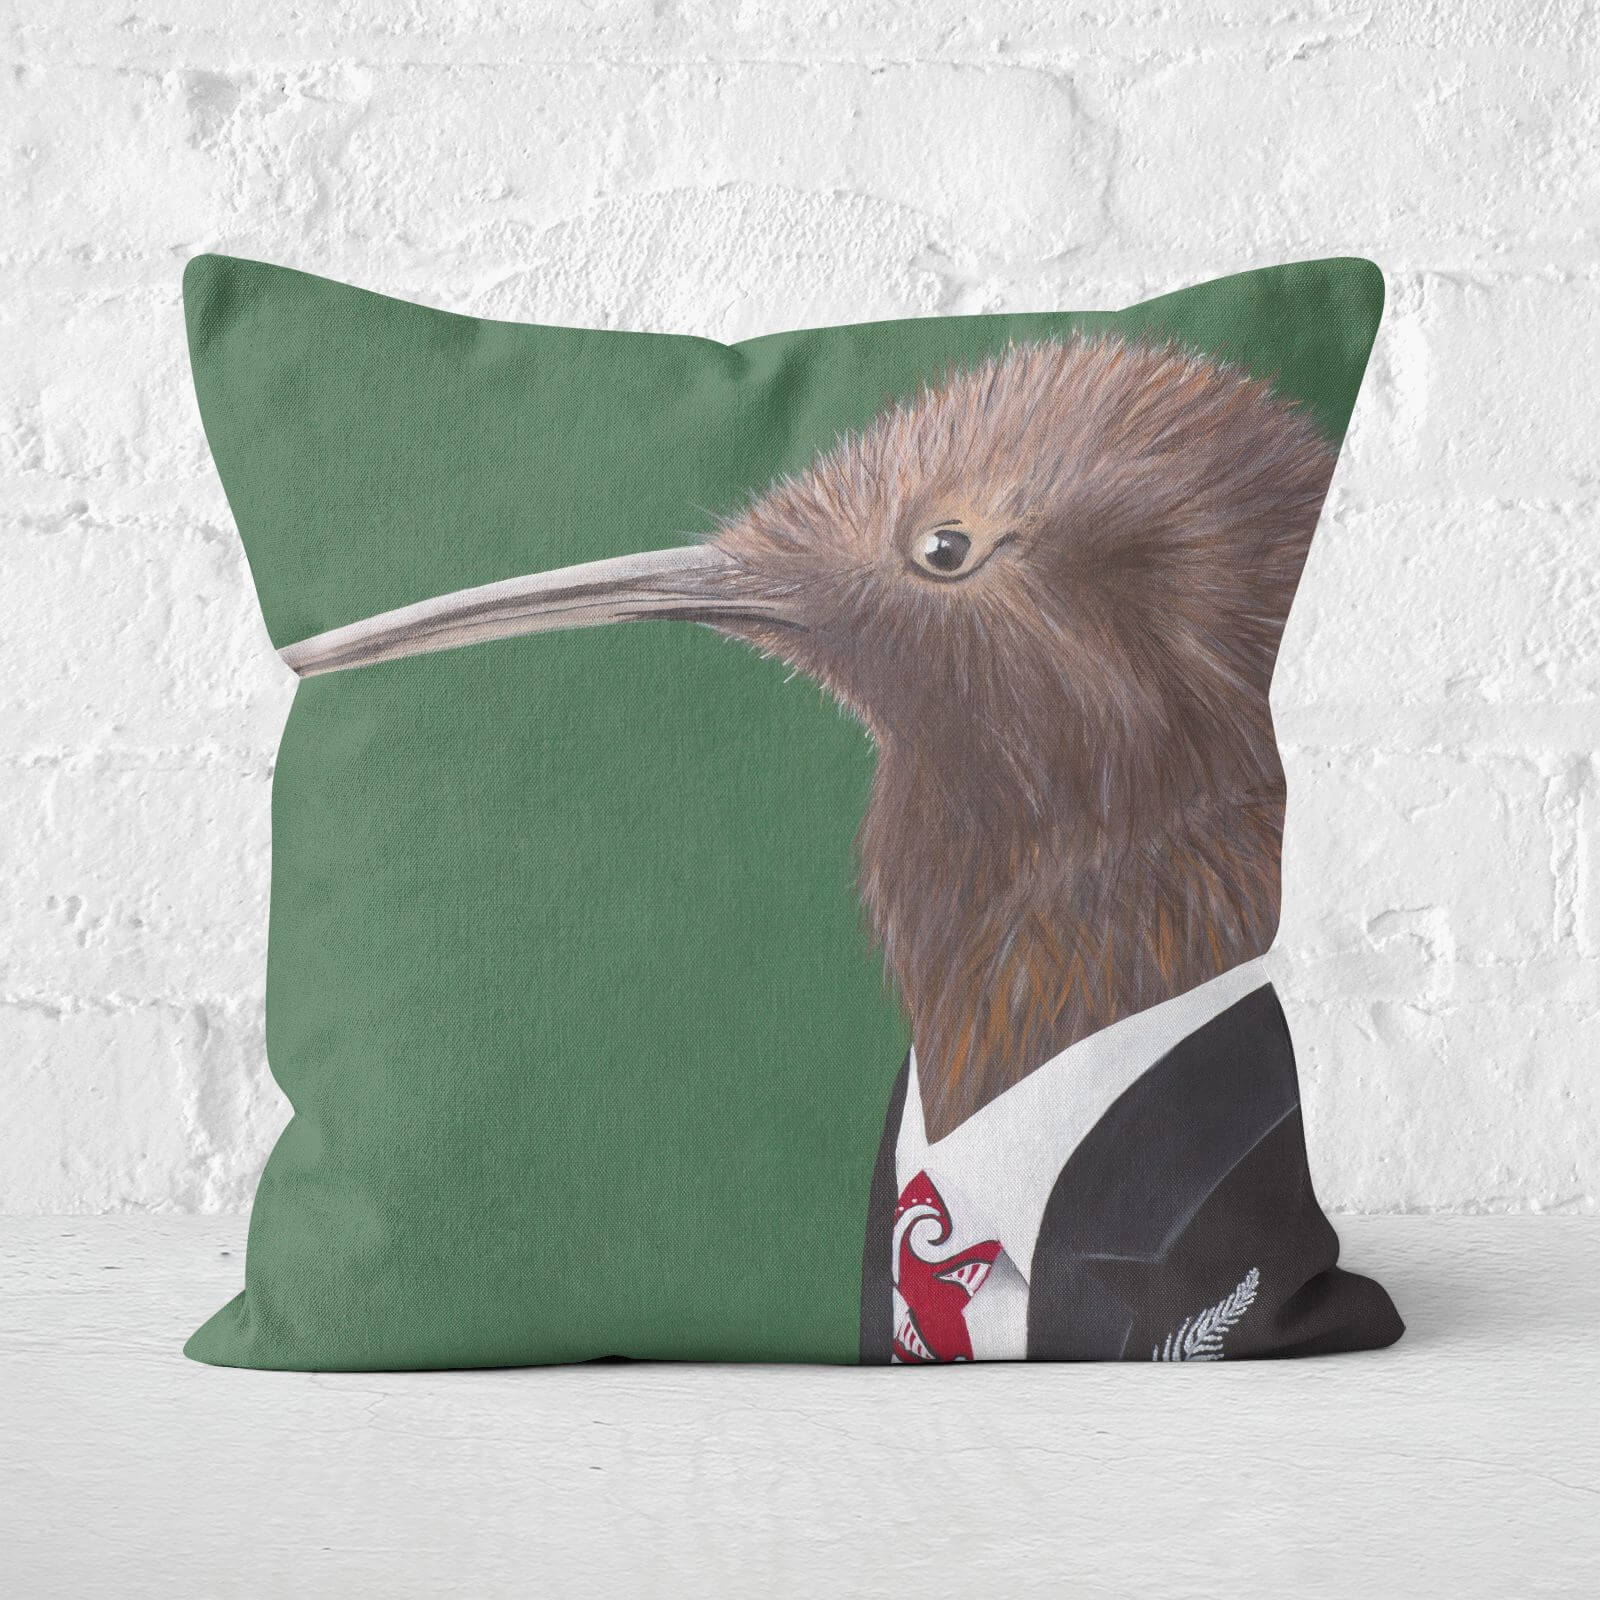 Kiwi In Suit Square Cushion - 40x40cm - Soft Touch